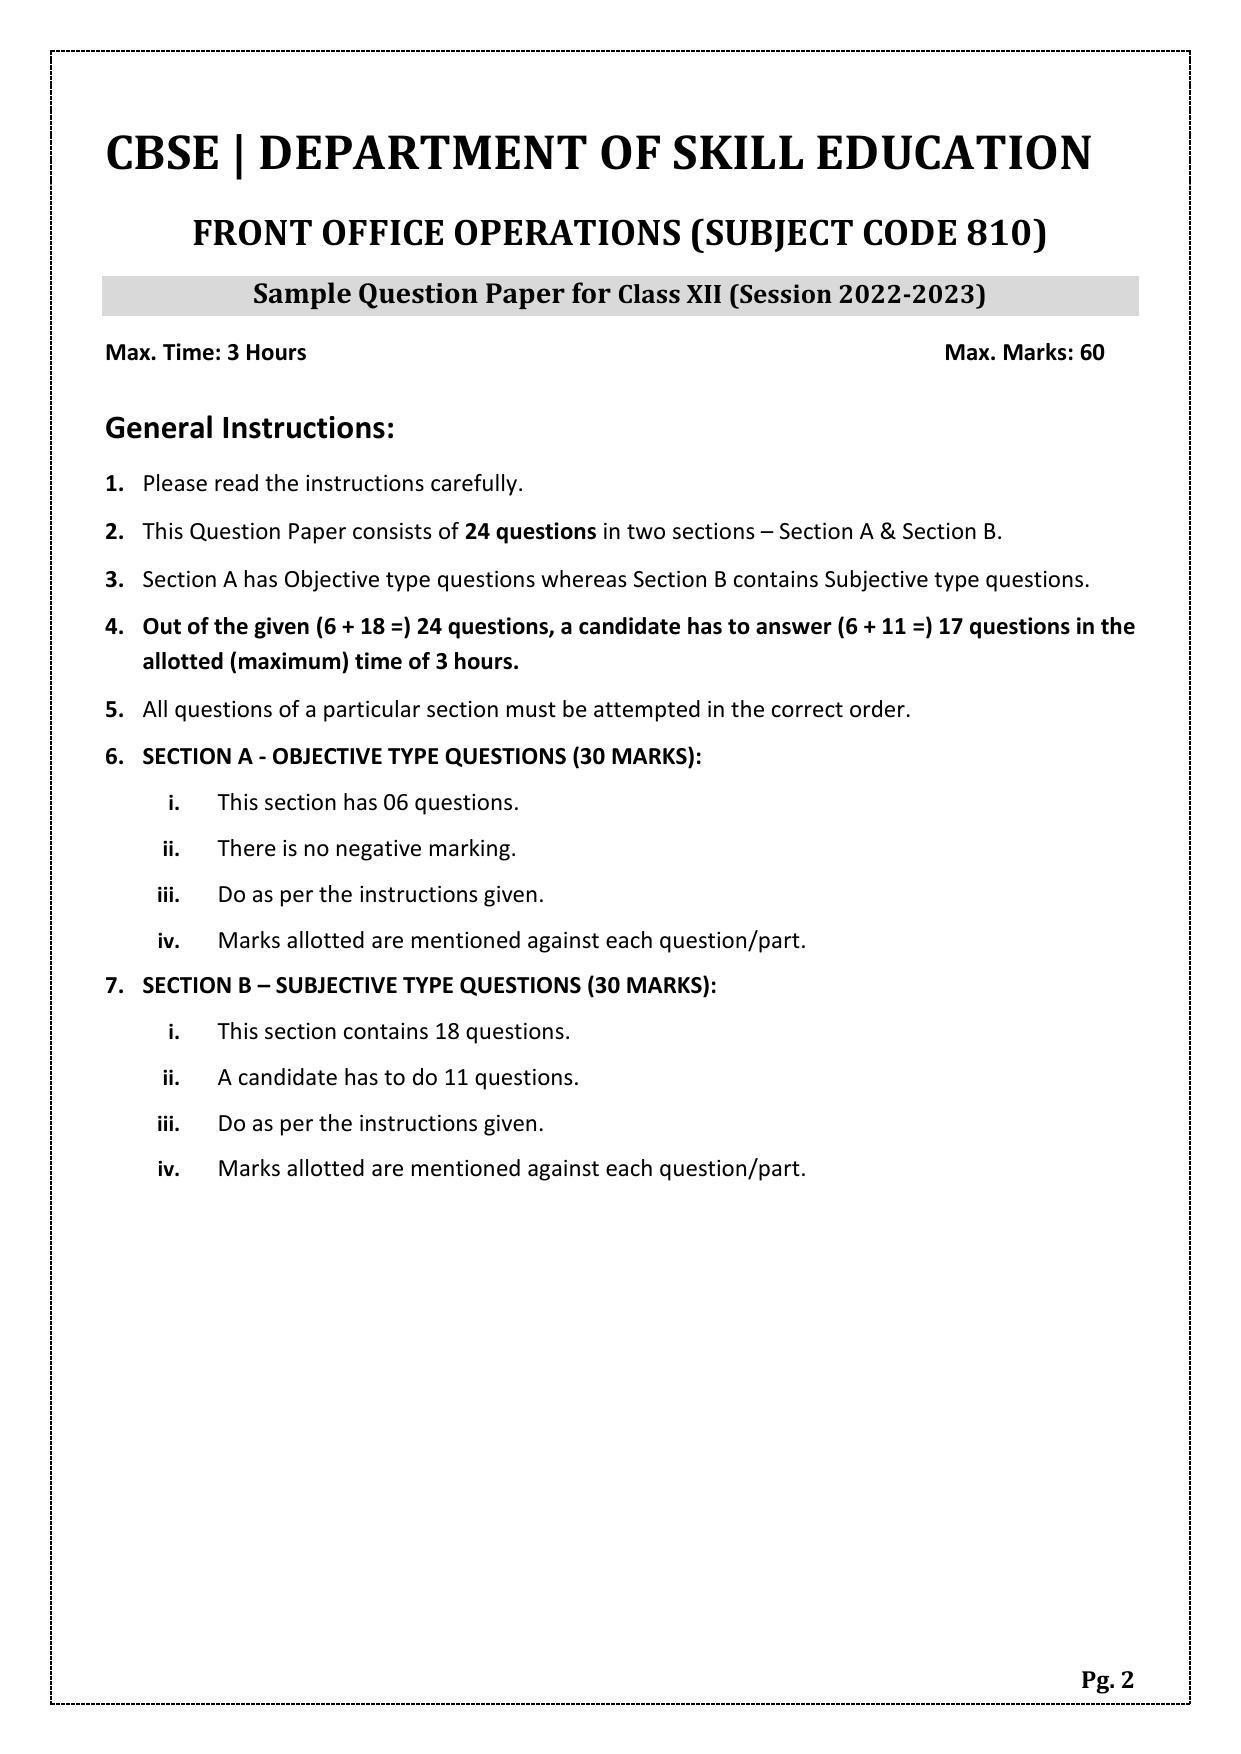 CBSE Class 12 Front Office Operations (Skill Education) Sample Papers 2023 - Page 2